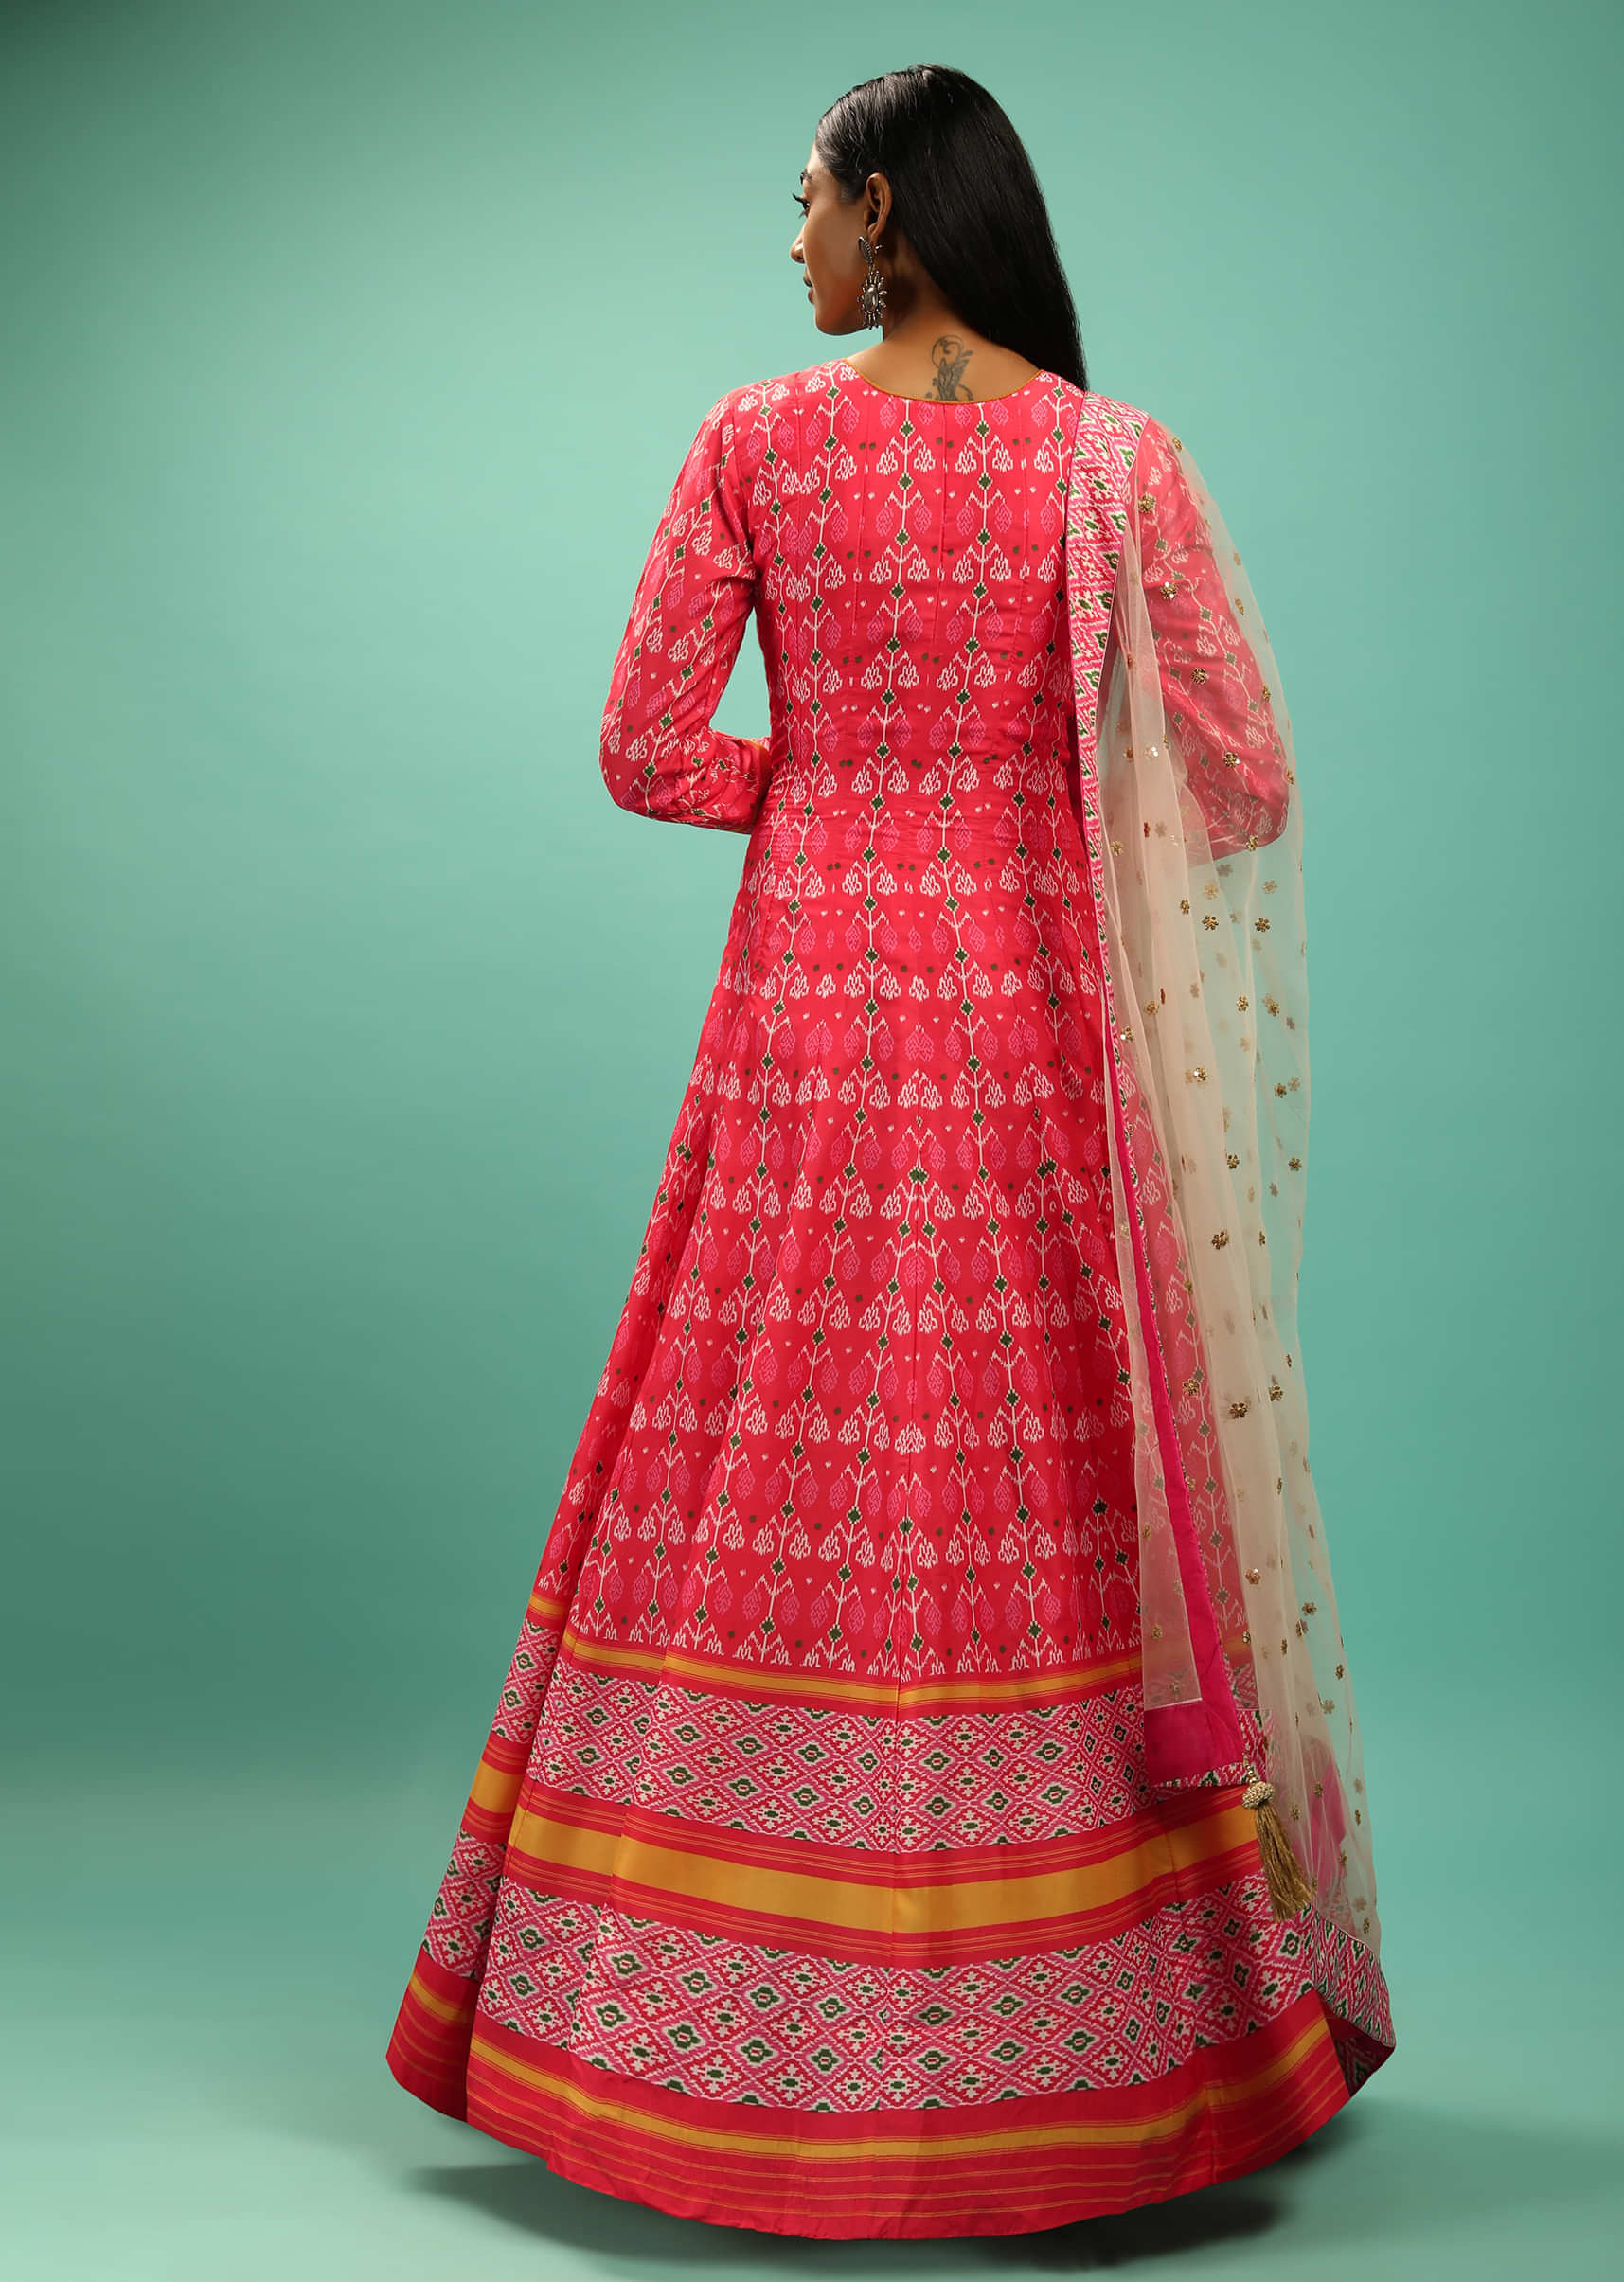 Fuchsia Pink Anarkali Suit With Multi Colored Patola Print And Mirror Embroidery  